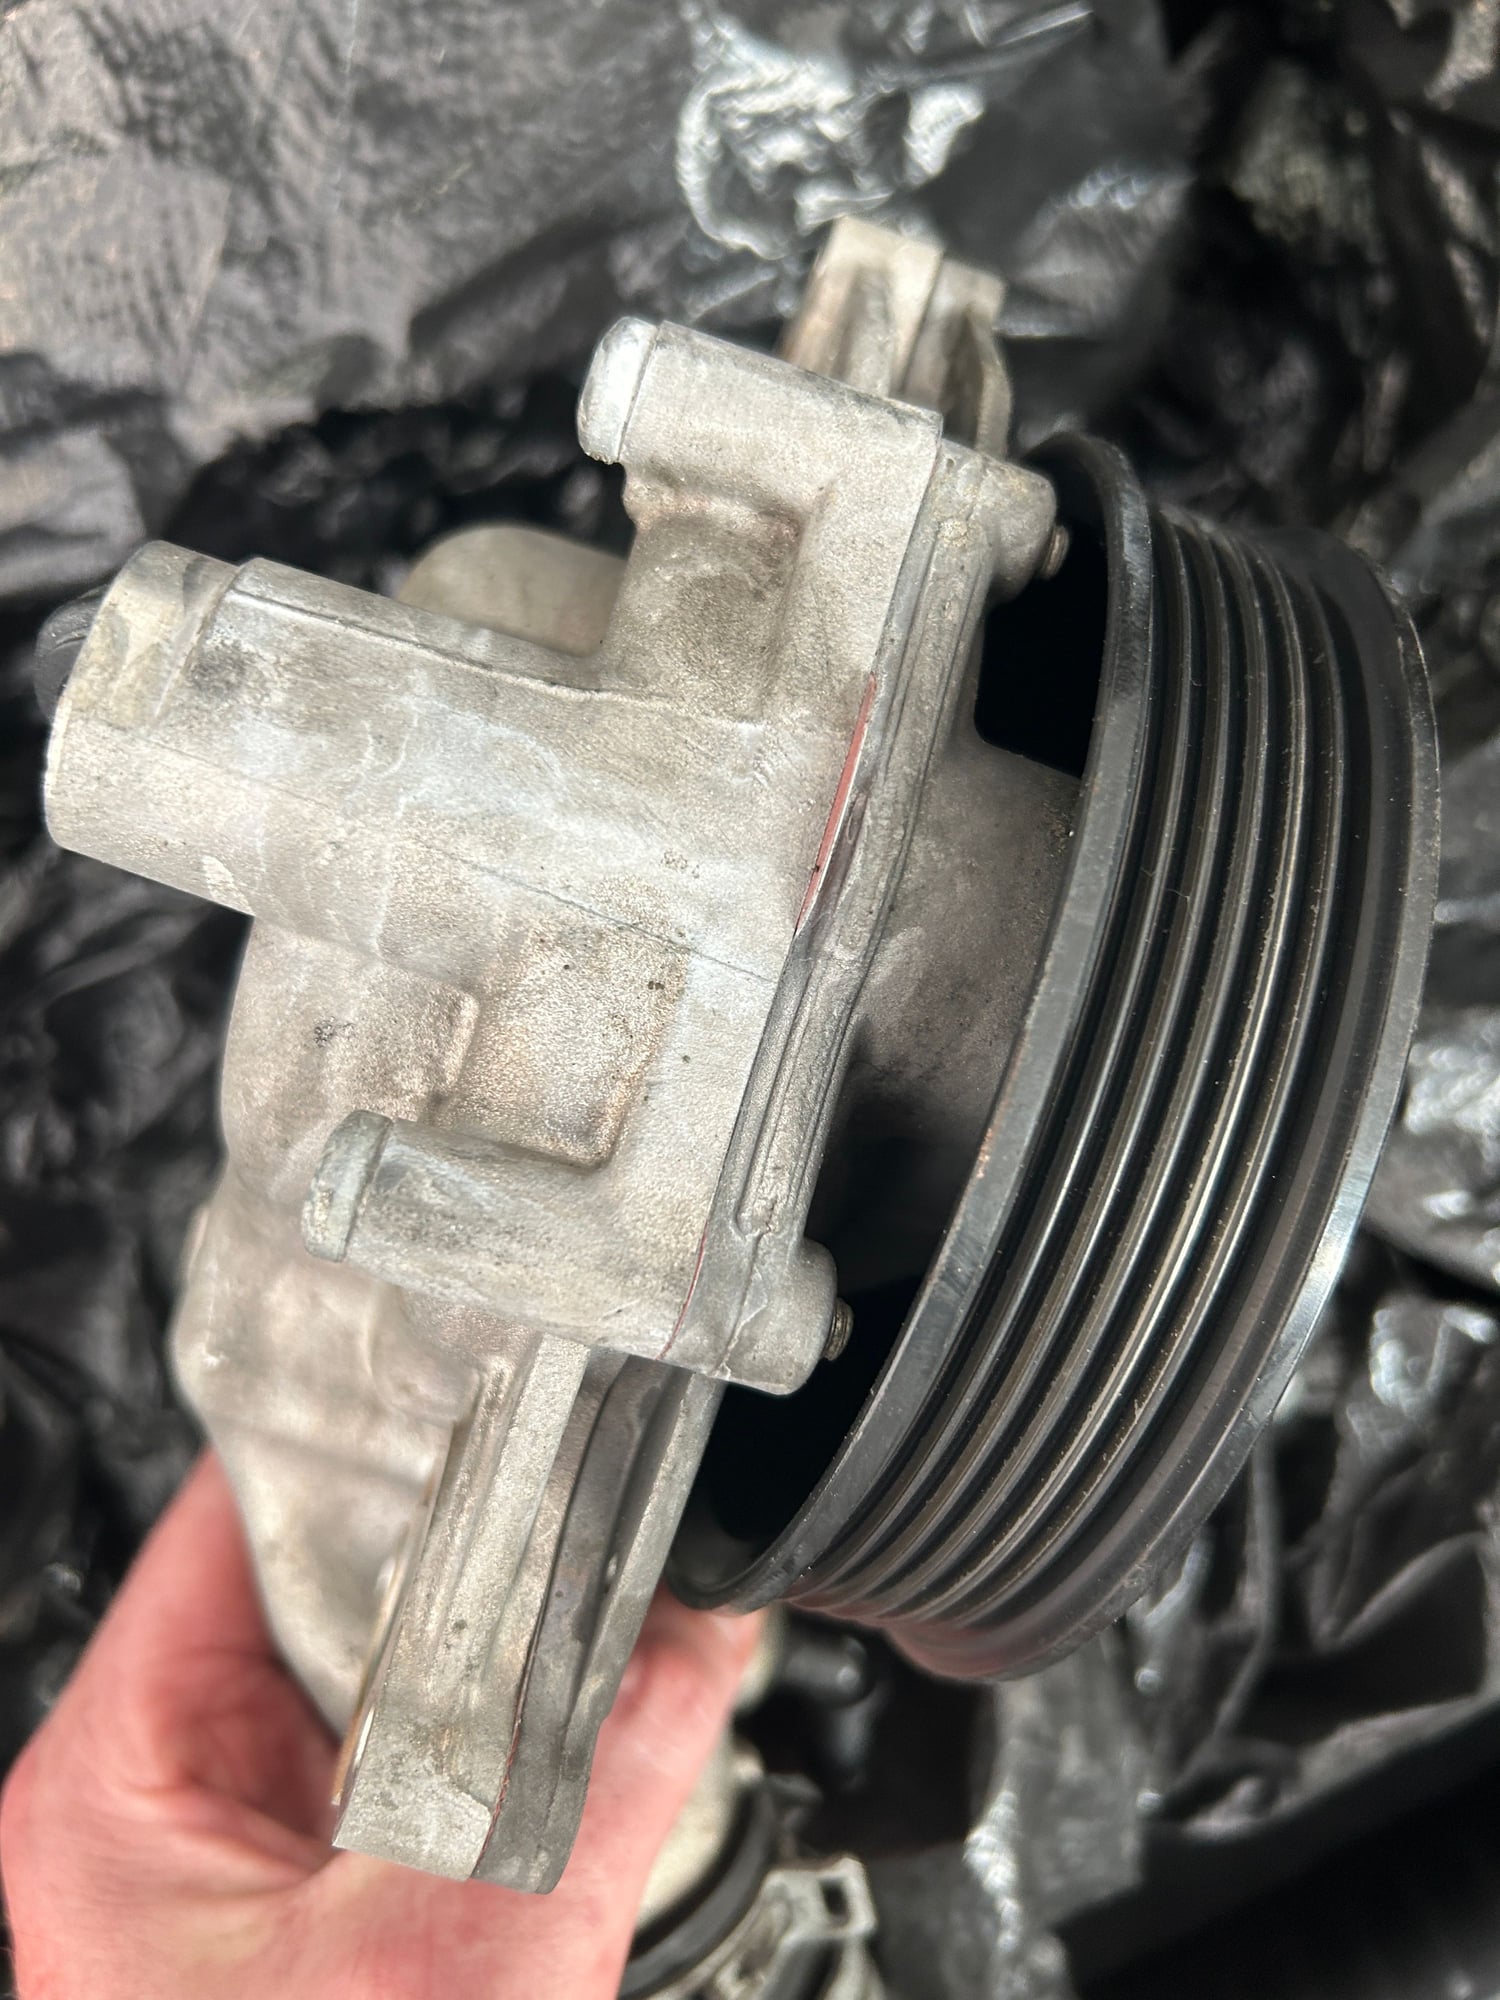 Accessories - 2012 XK Water Pump in working condition - Used - 2012 Jaguar XK - Chicago, IL 60618, United States